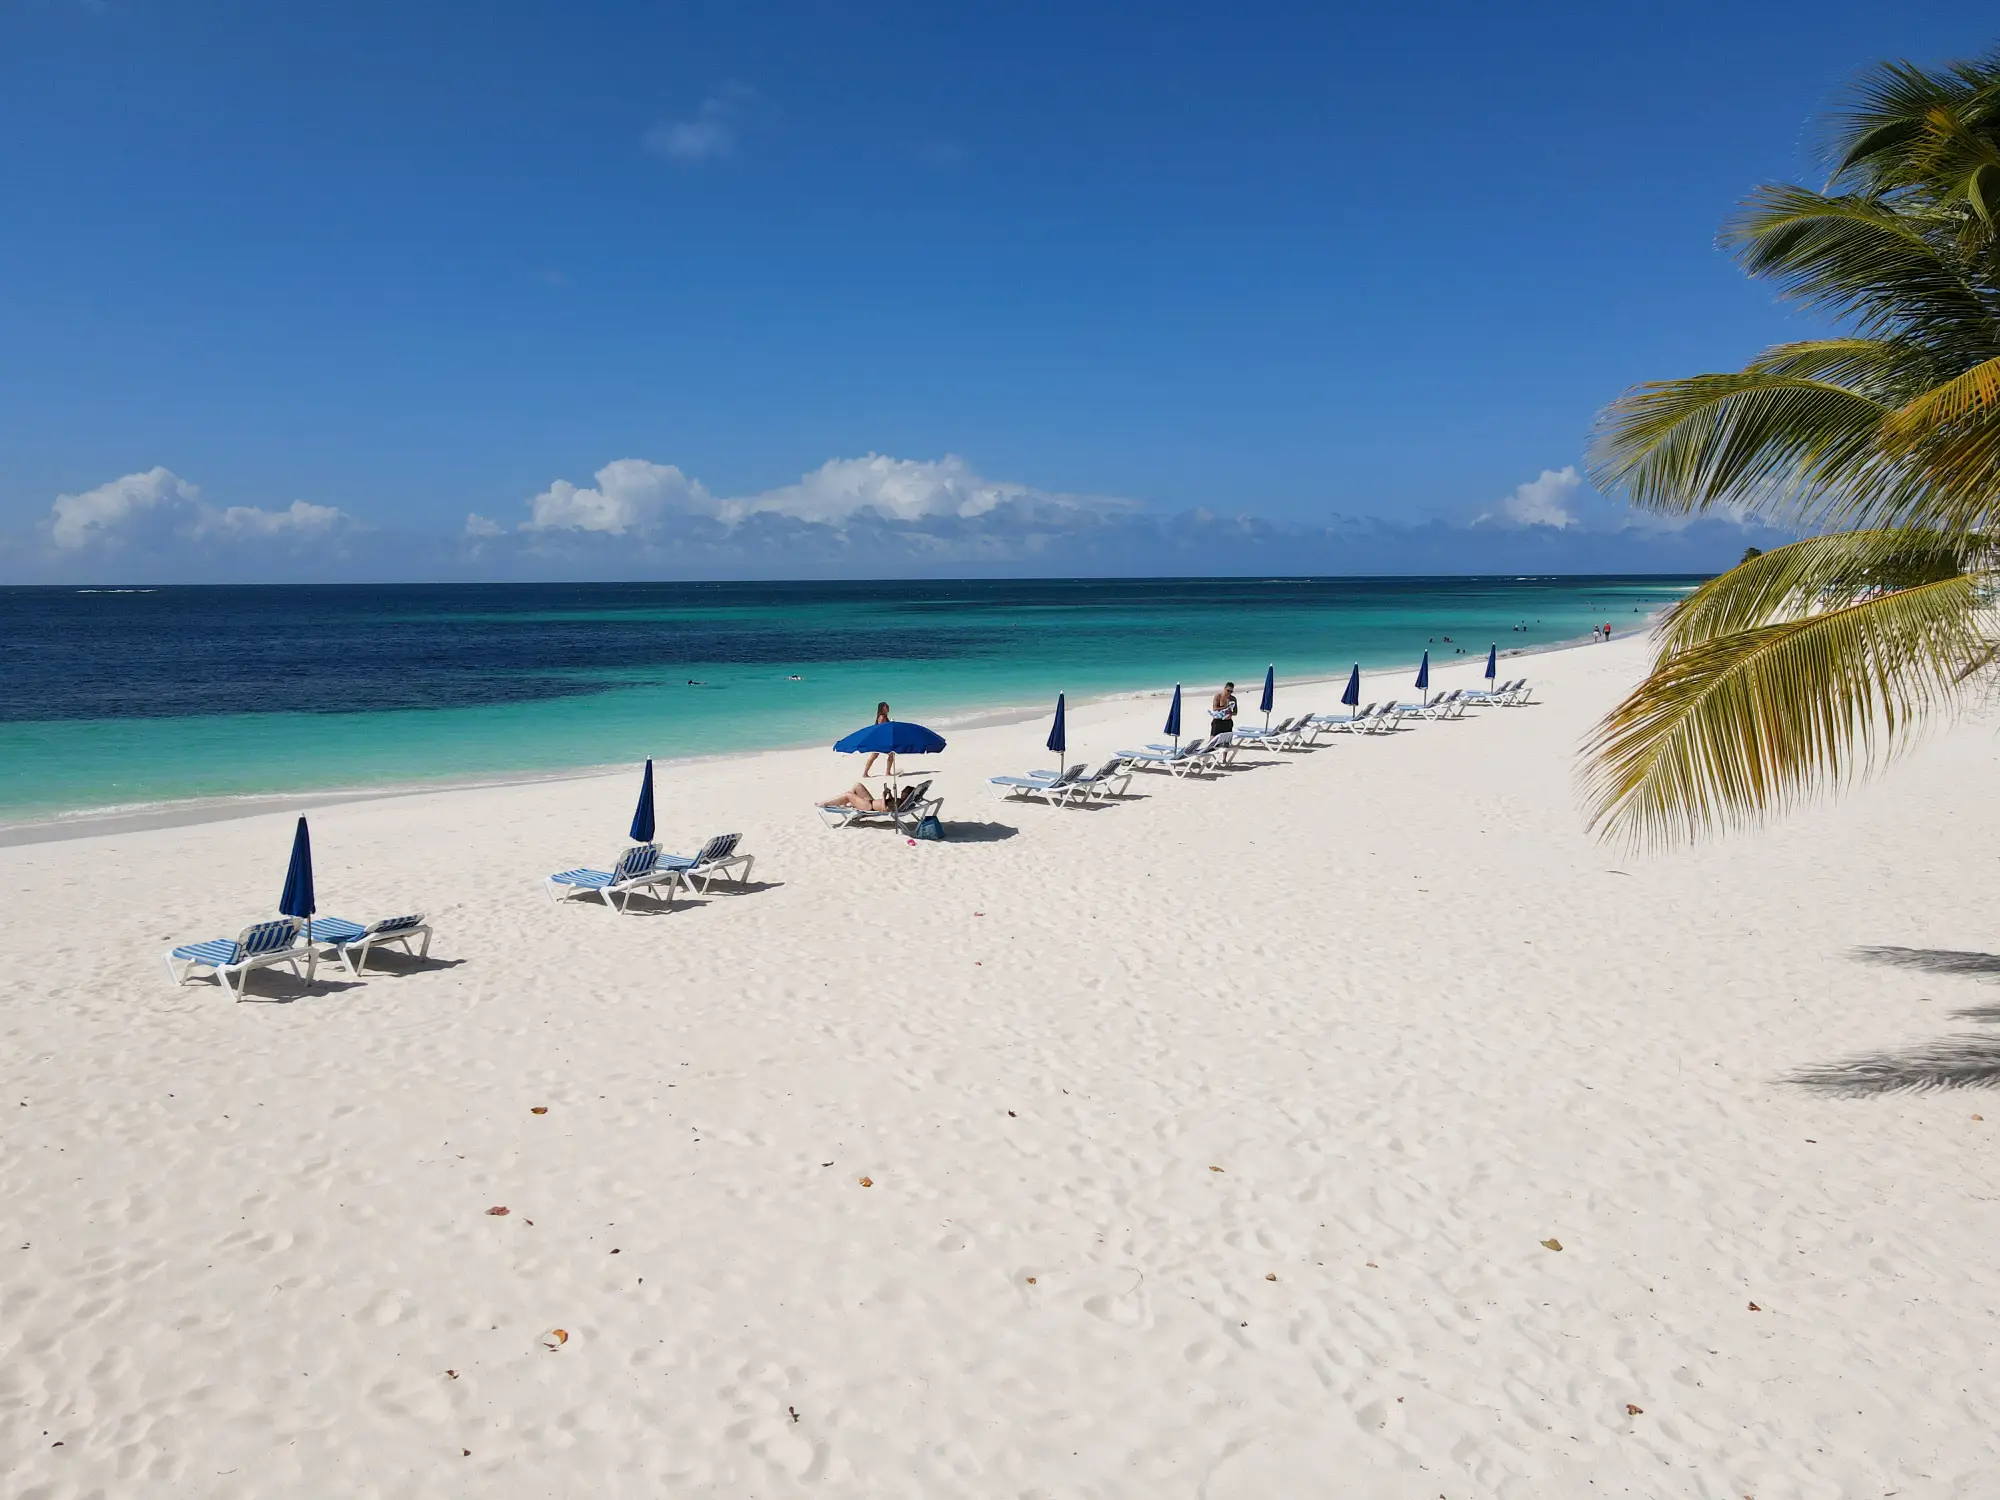 The beach at our anguilla vacation rentals